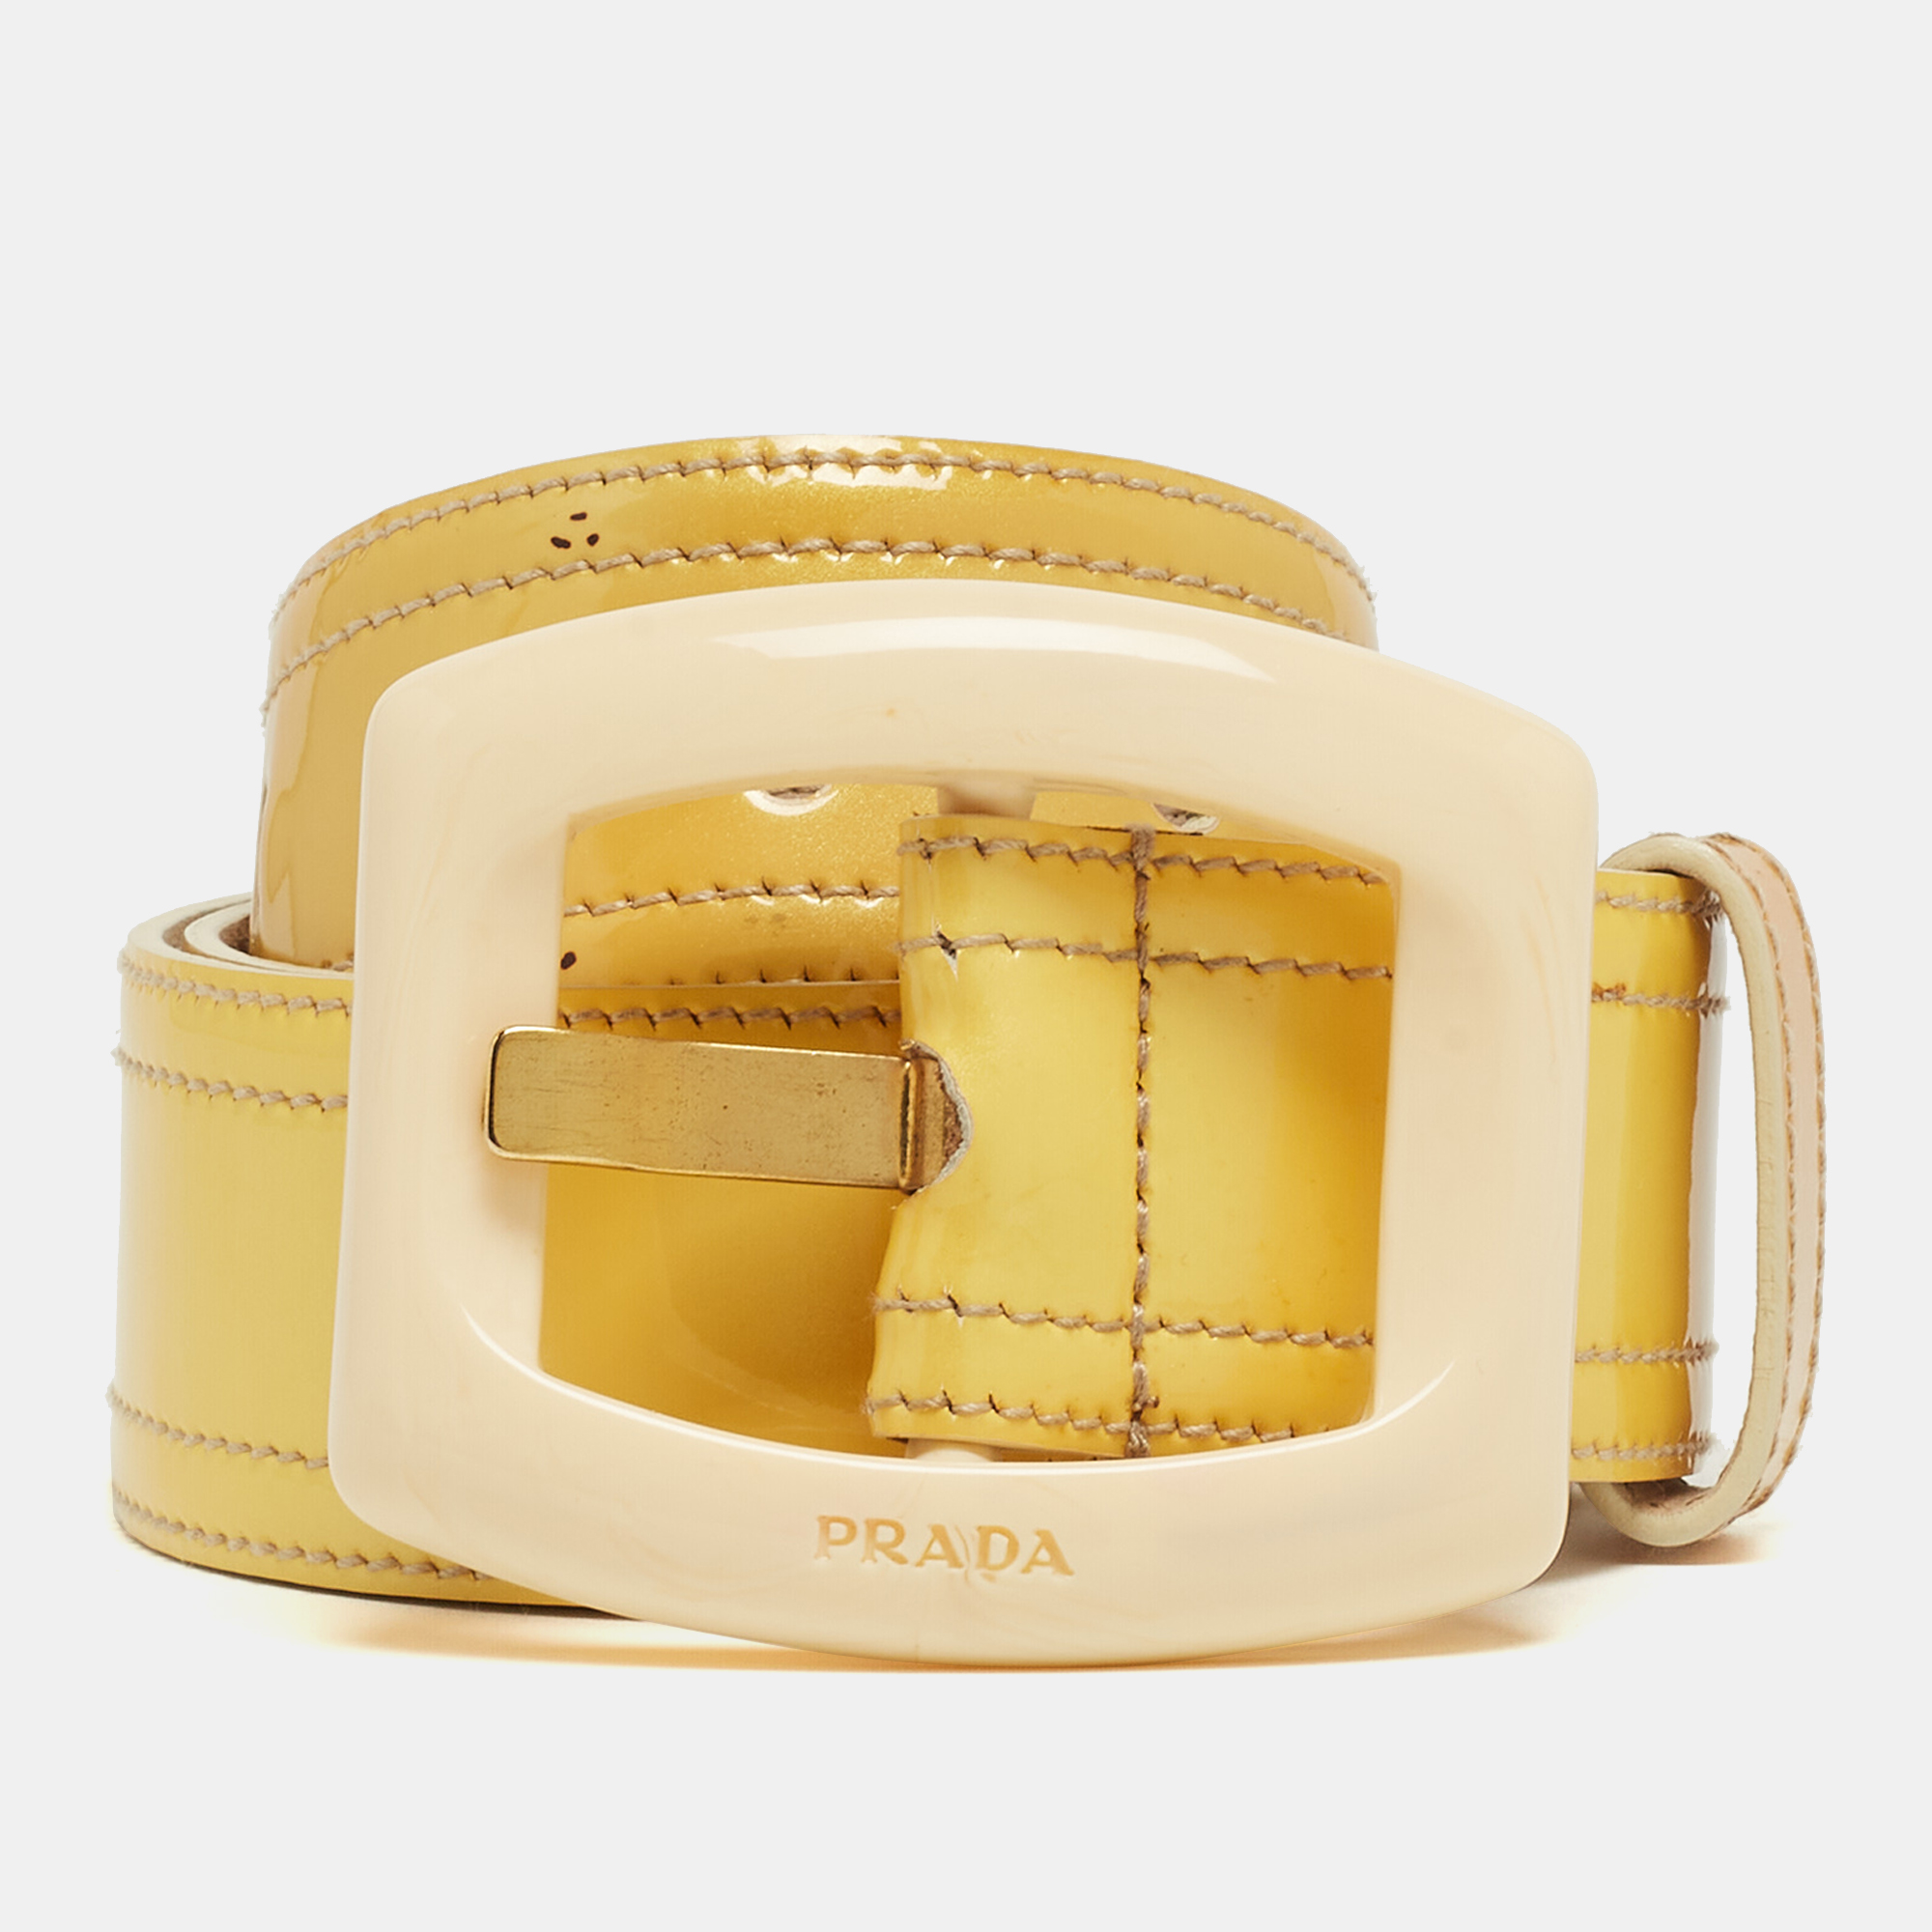 Add the luxury touch to your accessory collection with this buckle belt from Prada. It comes made from patent leather and is added with a pin buckle. Grab it right away